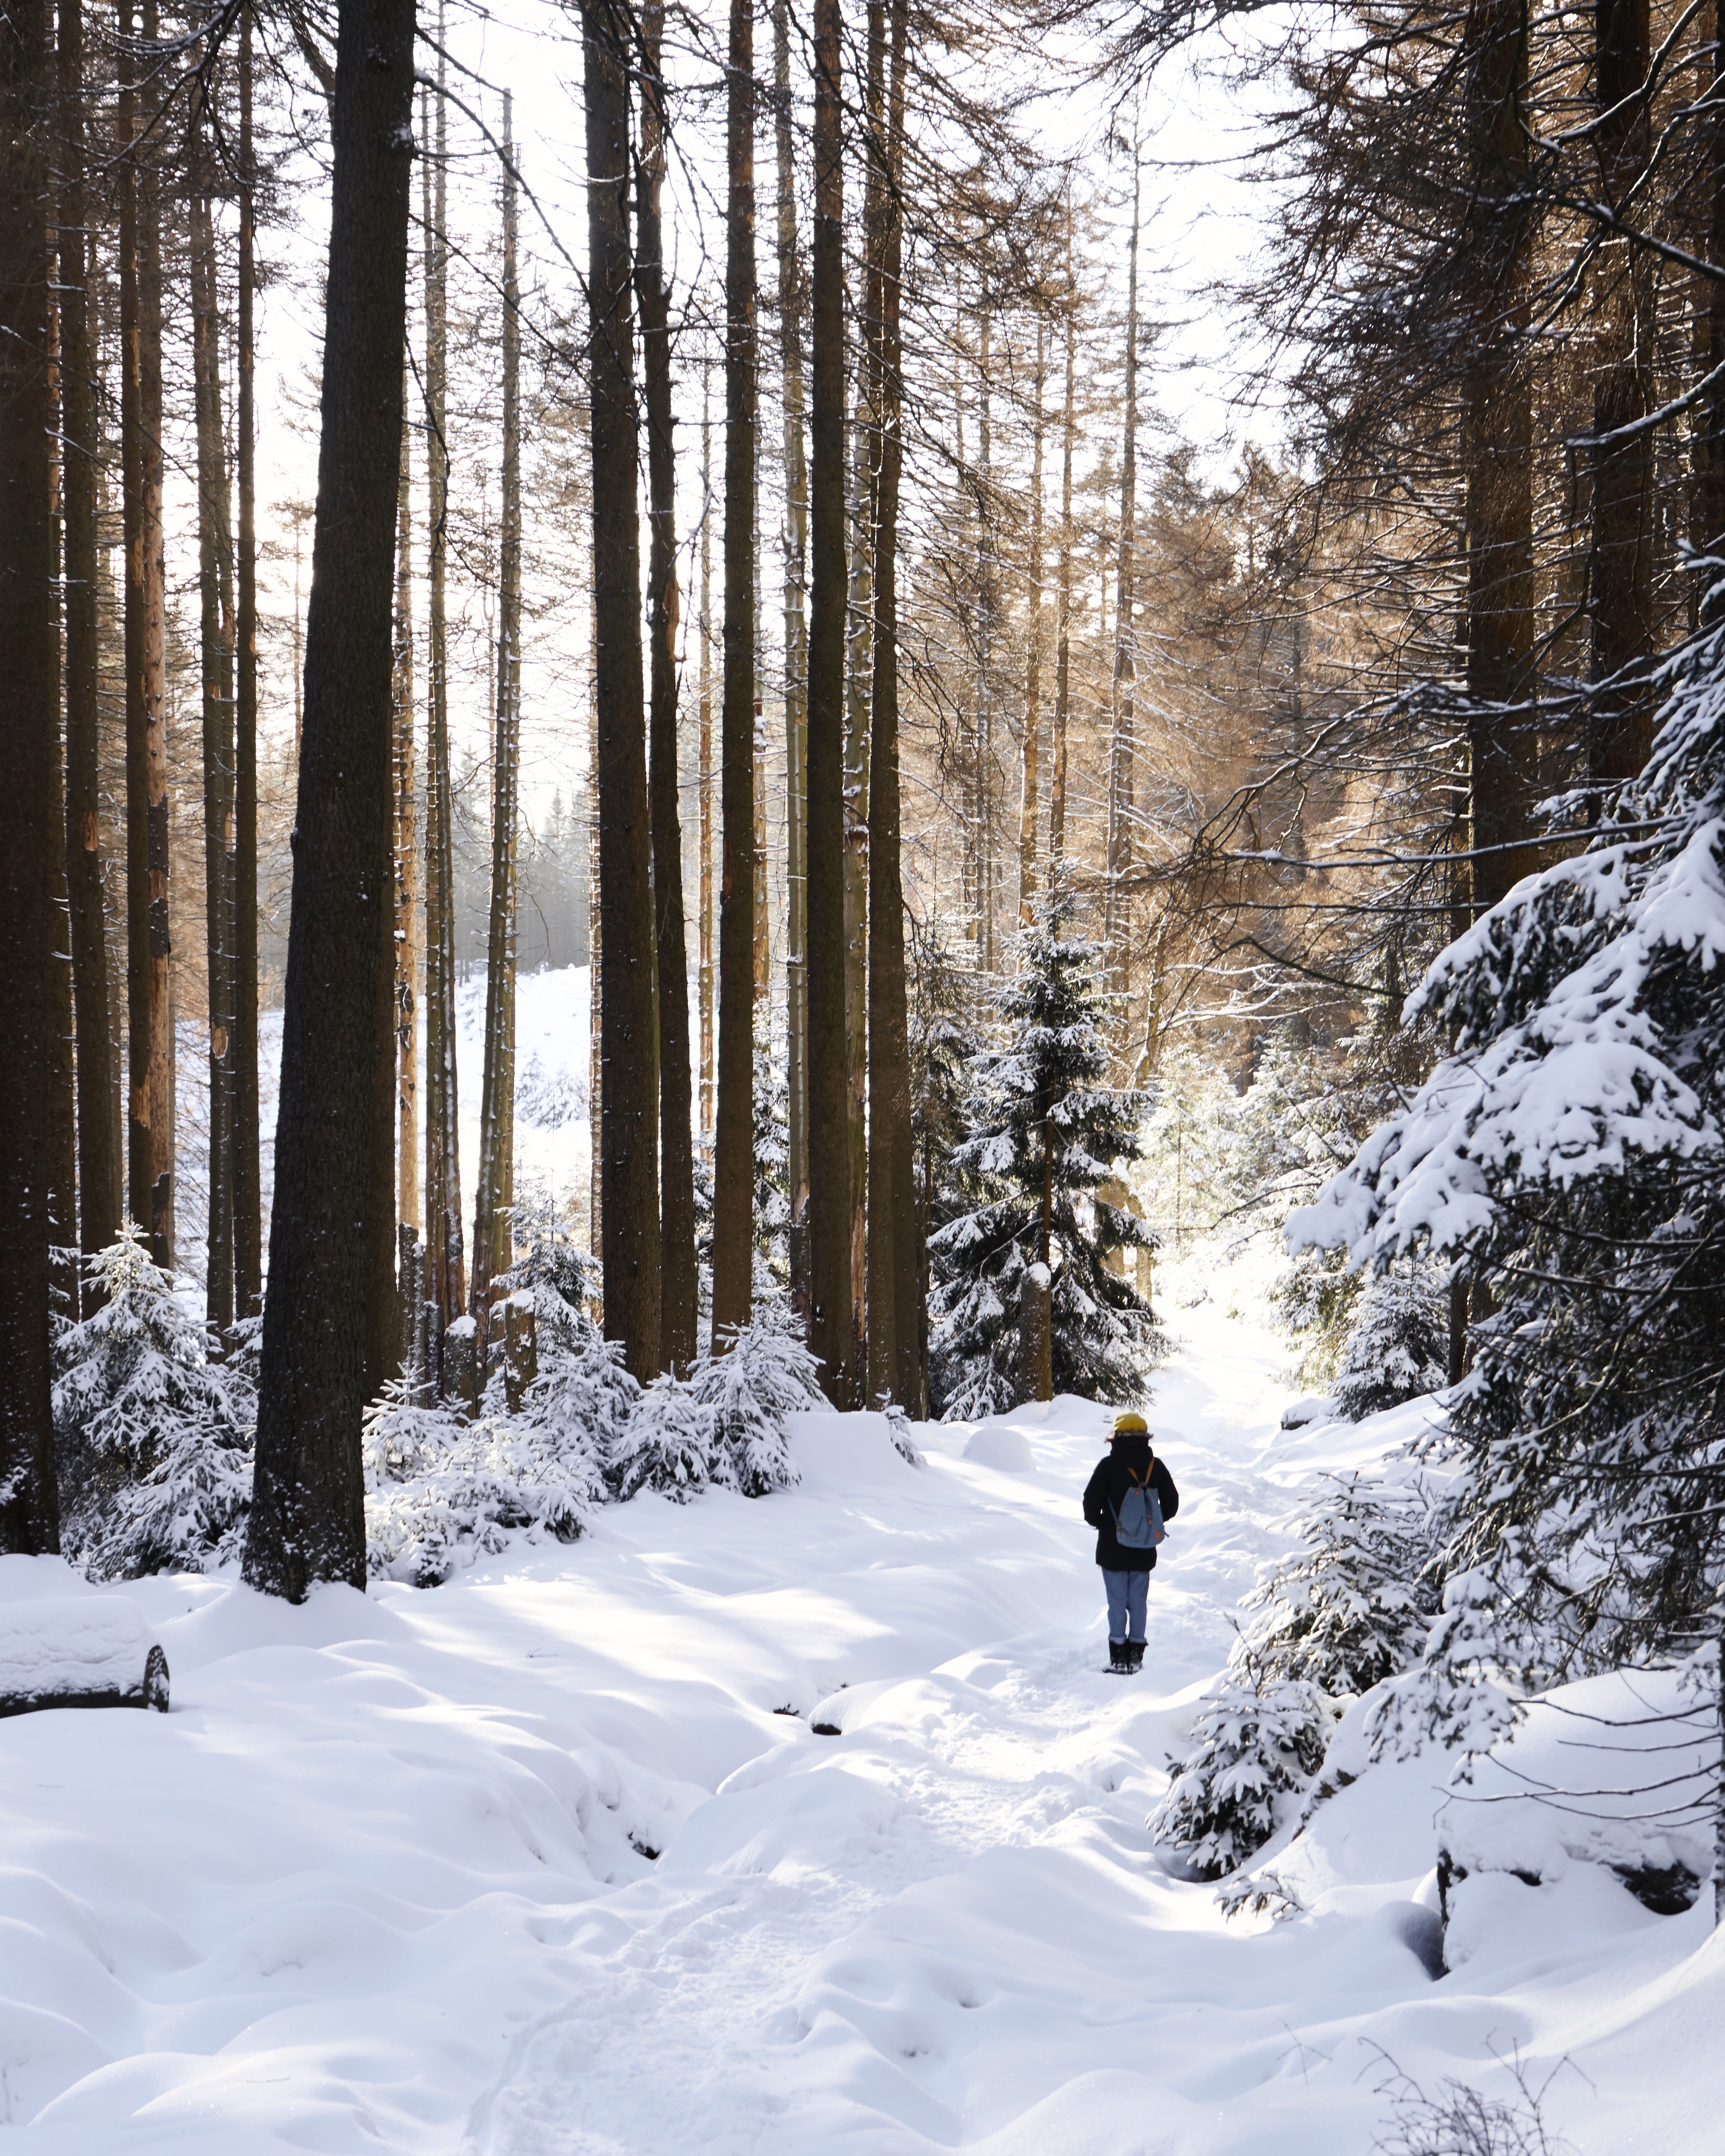 forest, snow, winter, nature, trees, privacy, seclusion, stroll